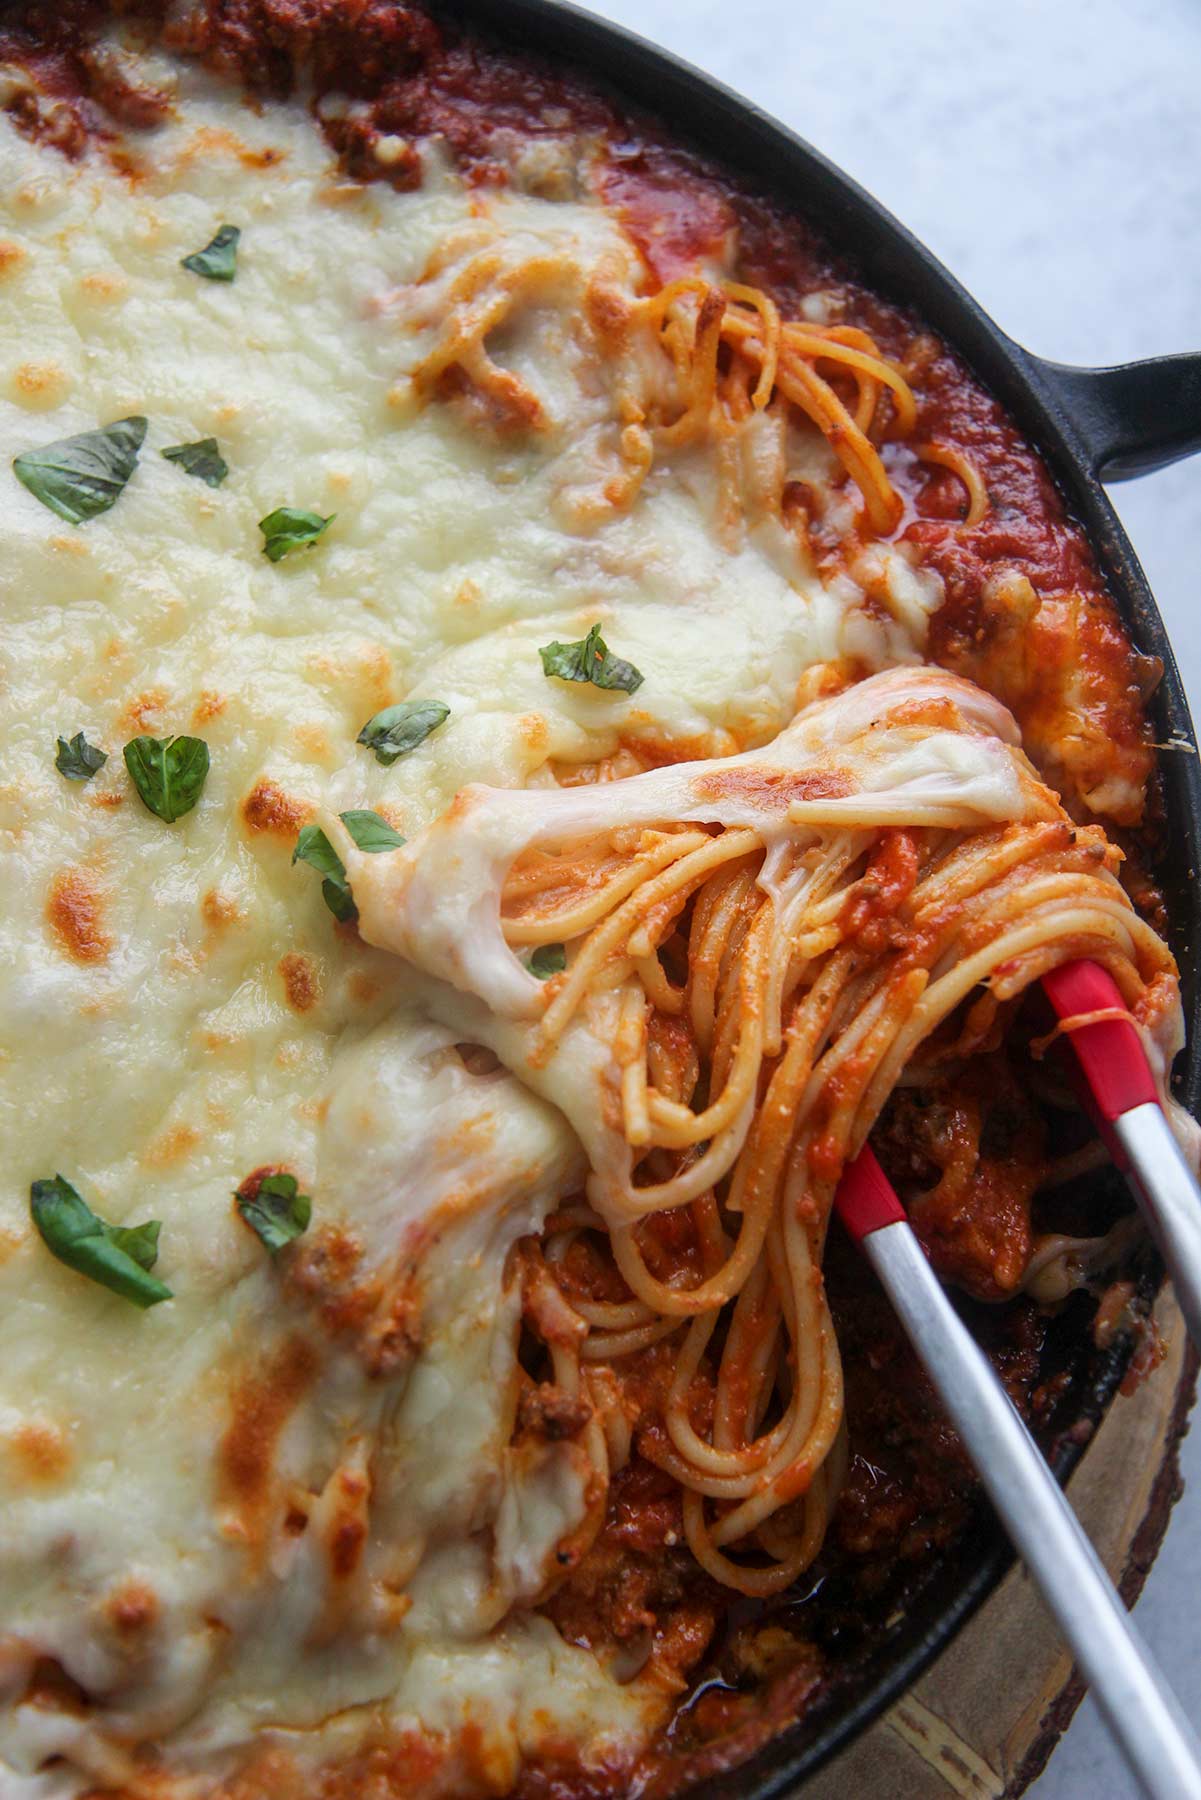 baked spaghetti in a cast iron skillet with red tongs.